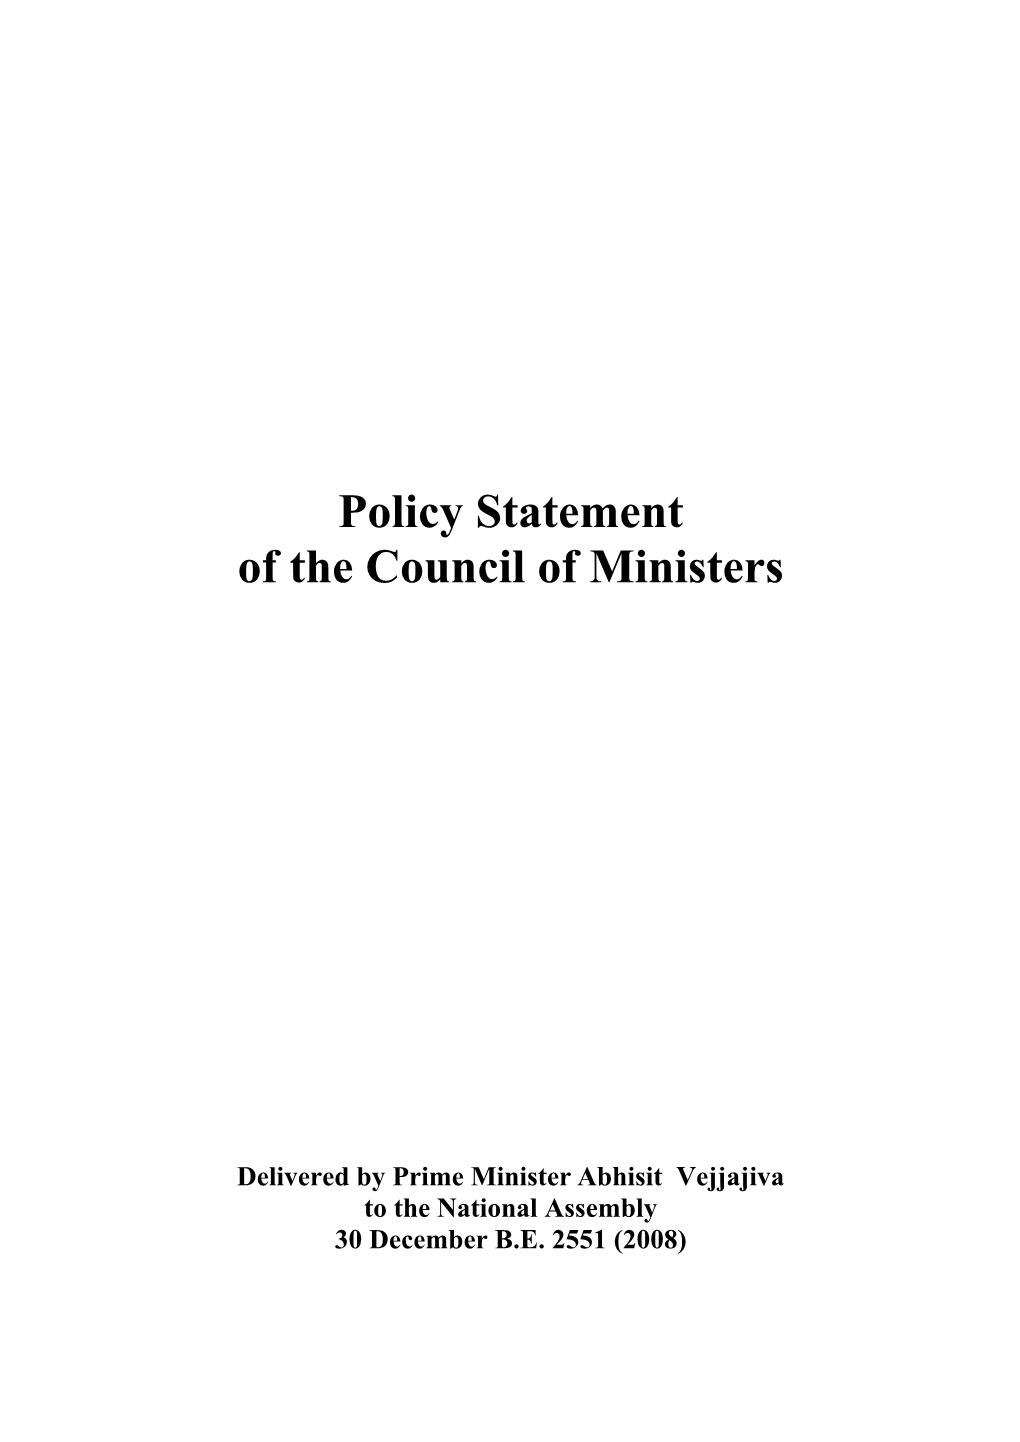 Policy Statement of the Council of Ministers